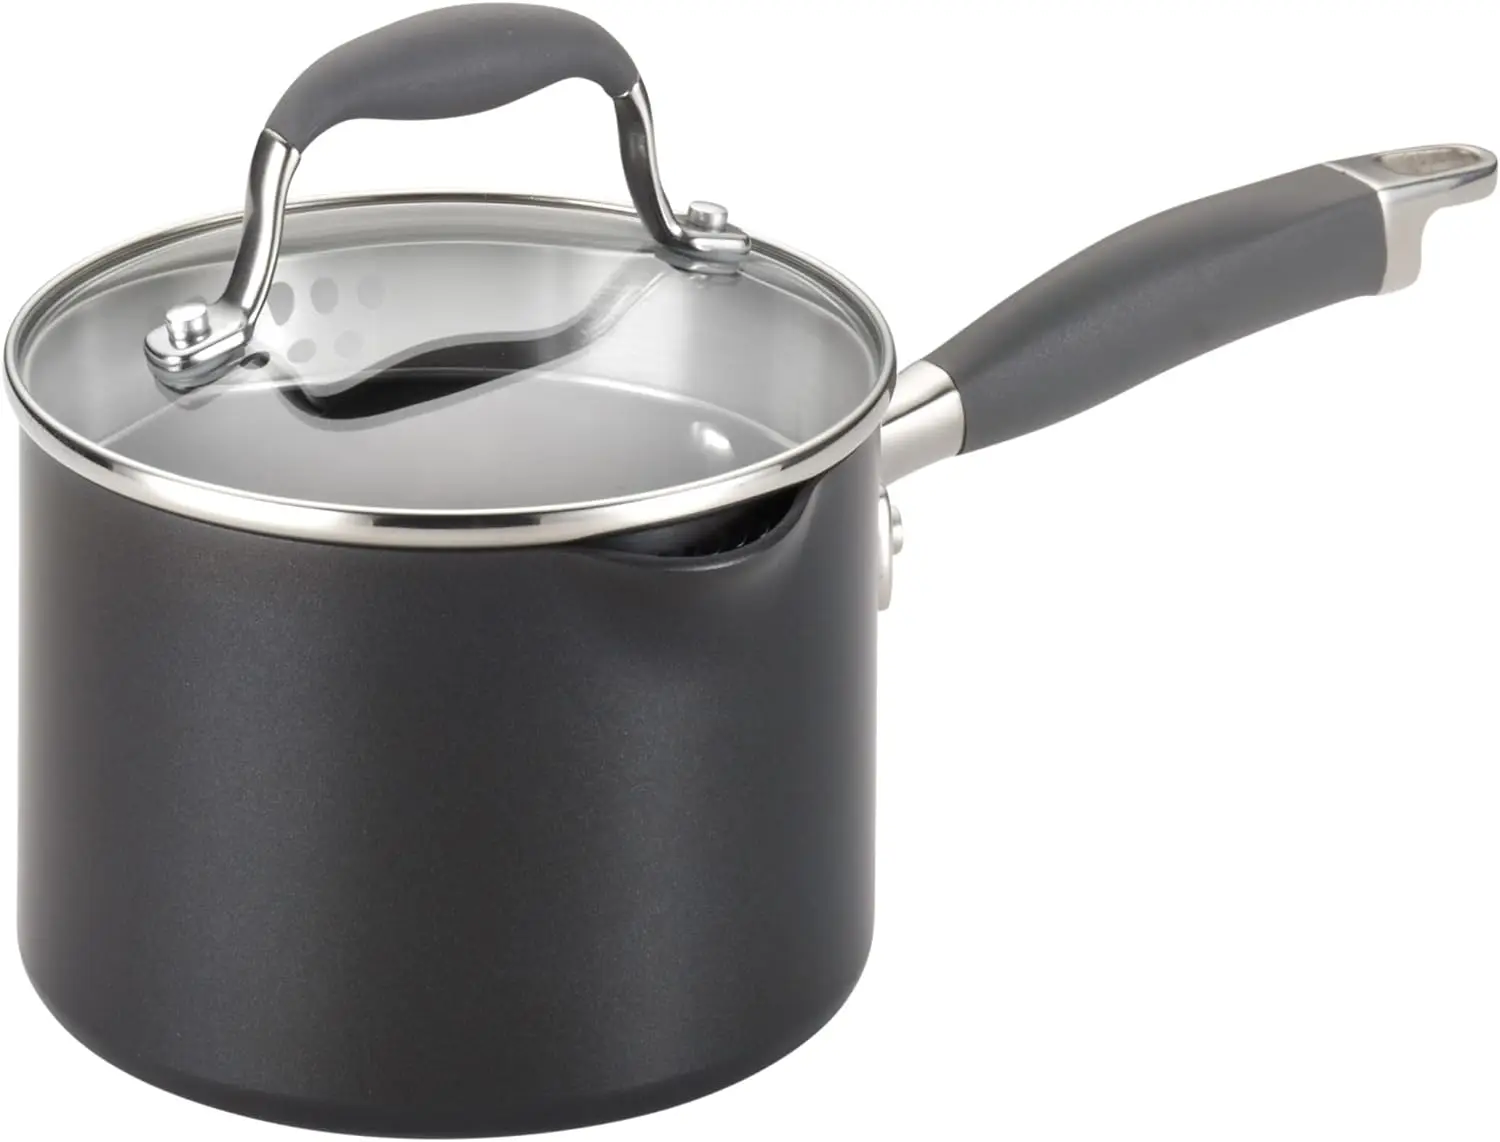 

Hard Anodized Nonstick Sauce Pan/Saucepan with Straining and Lid, 2 Quart, Graphite